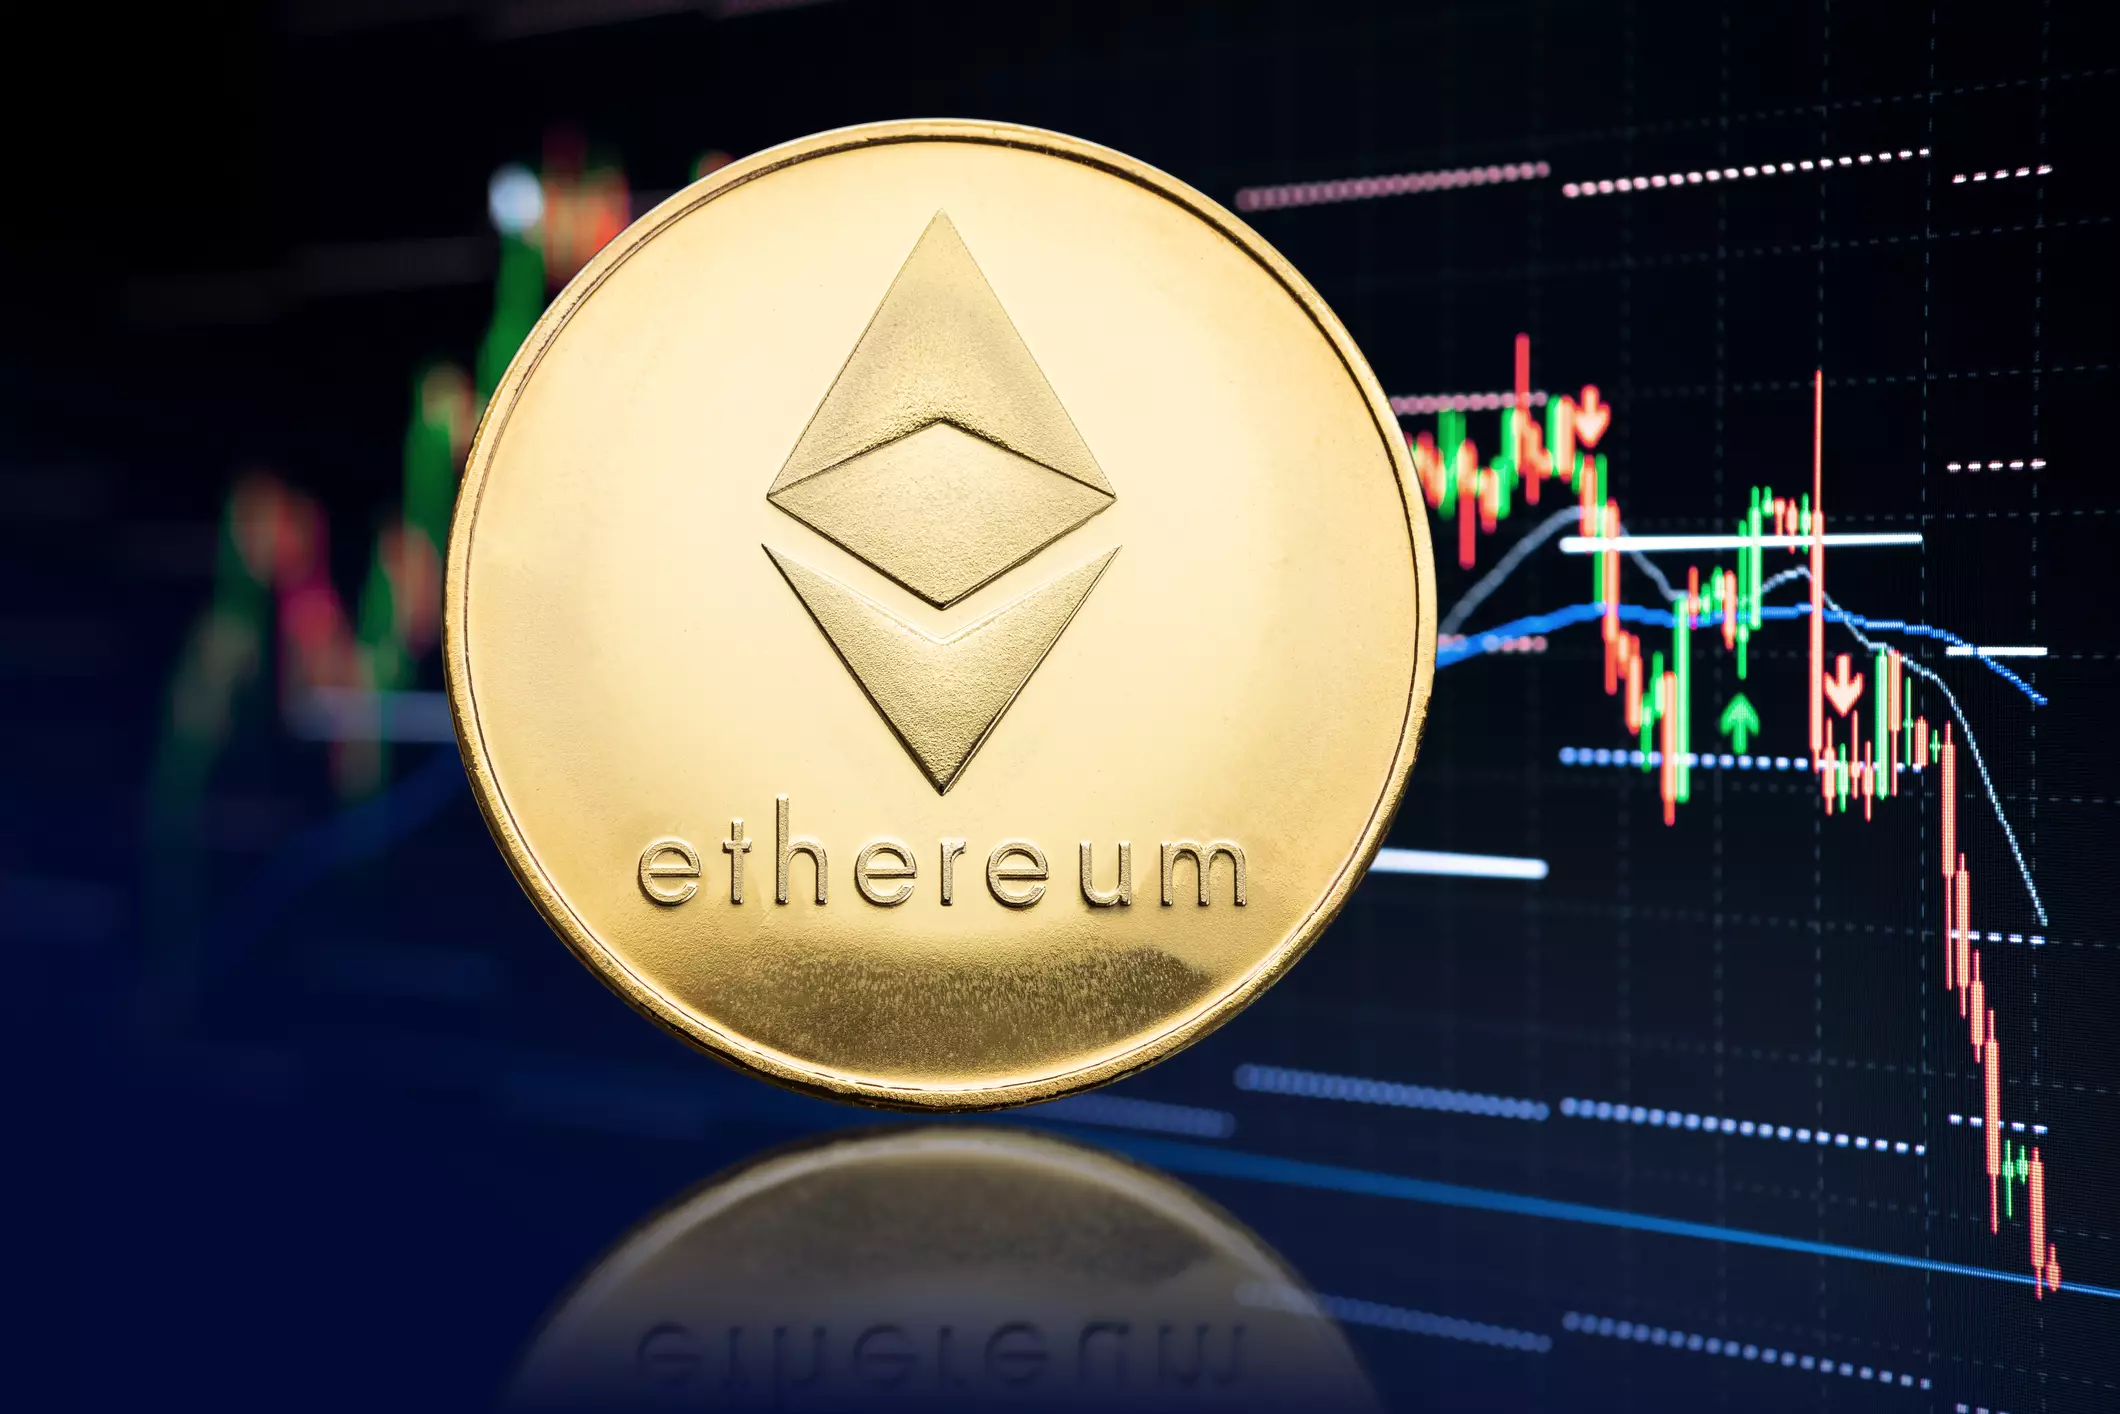 Ethereum (ETH) Predicted to Reach $15,000 by 2025: A Critical Analysis